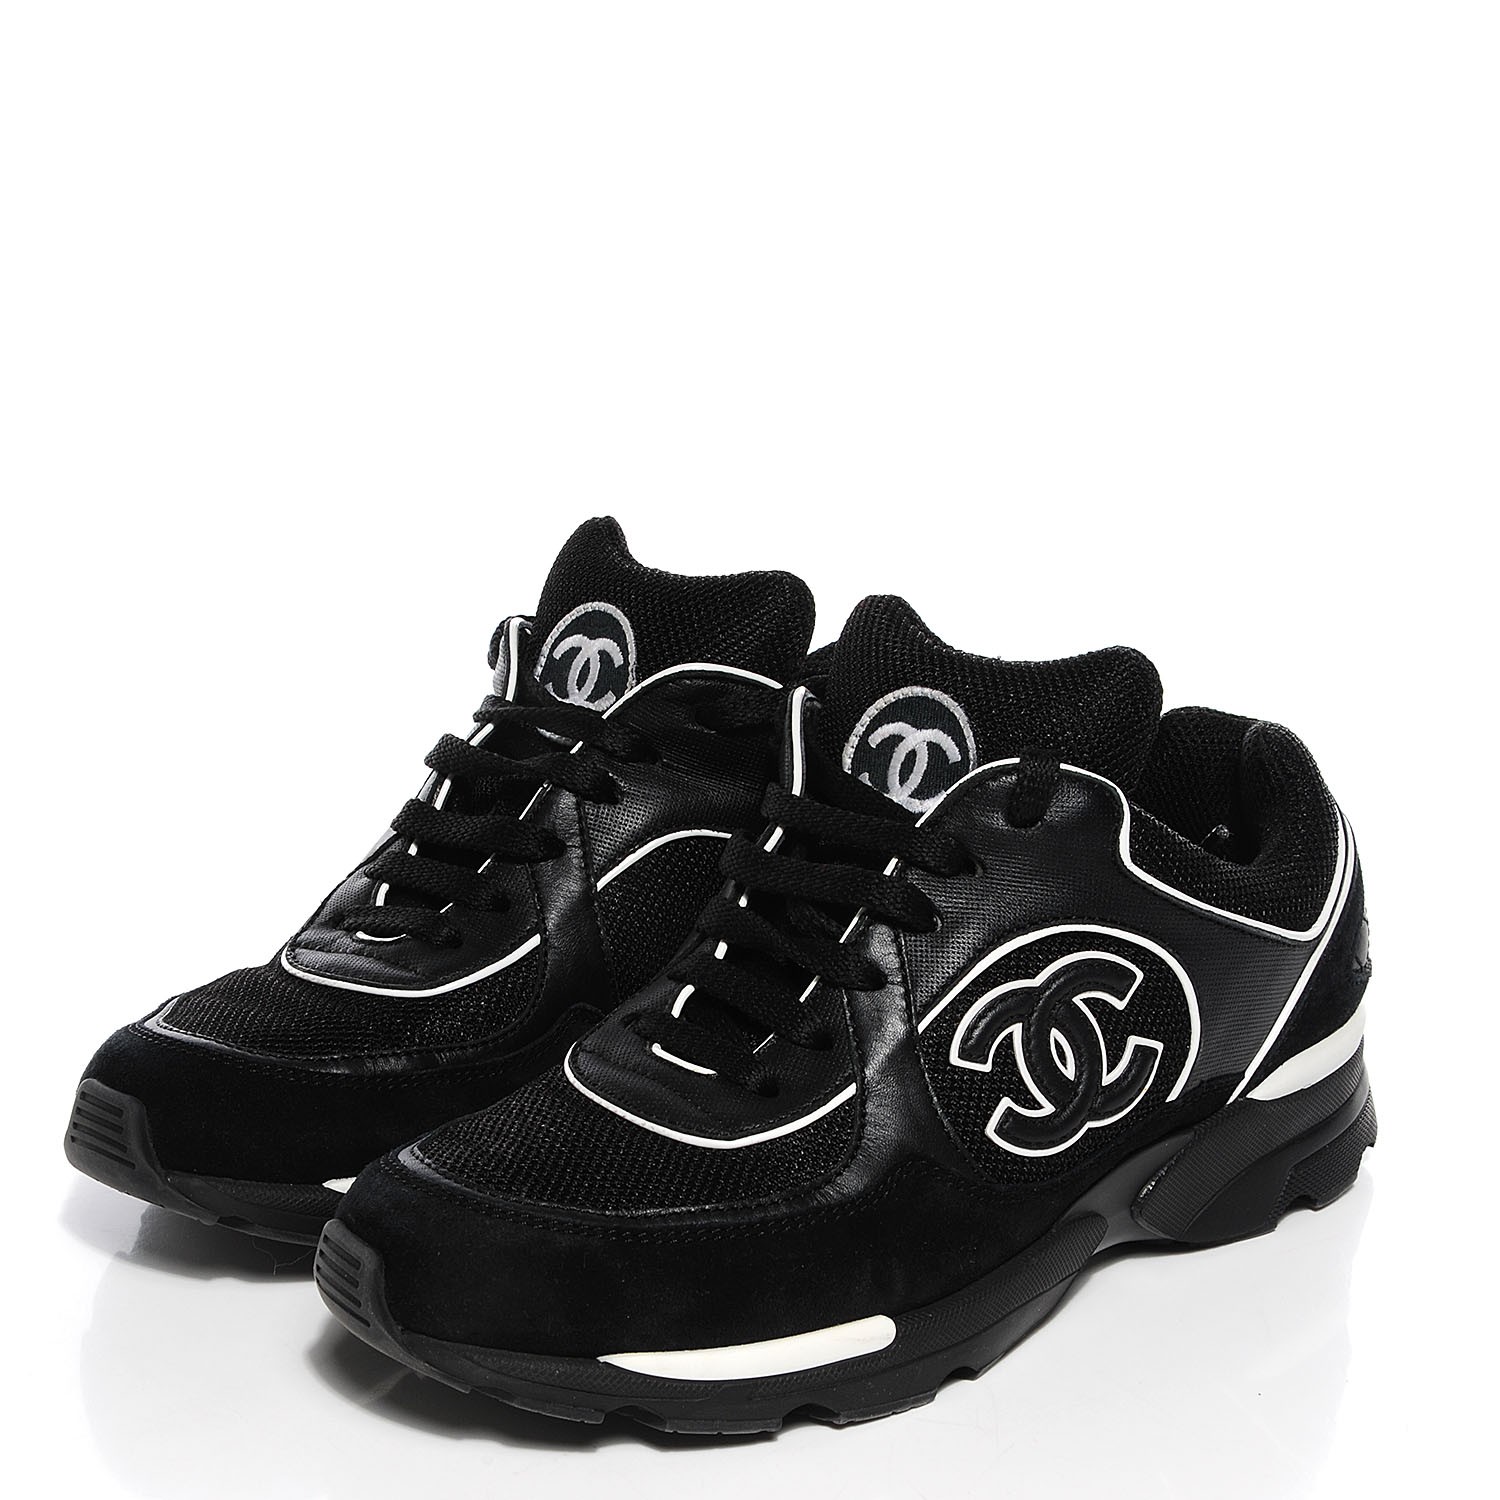 CHANEL Suede Calfskin CC Sneakers Black White 36.5 94566